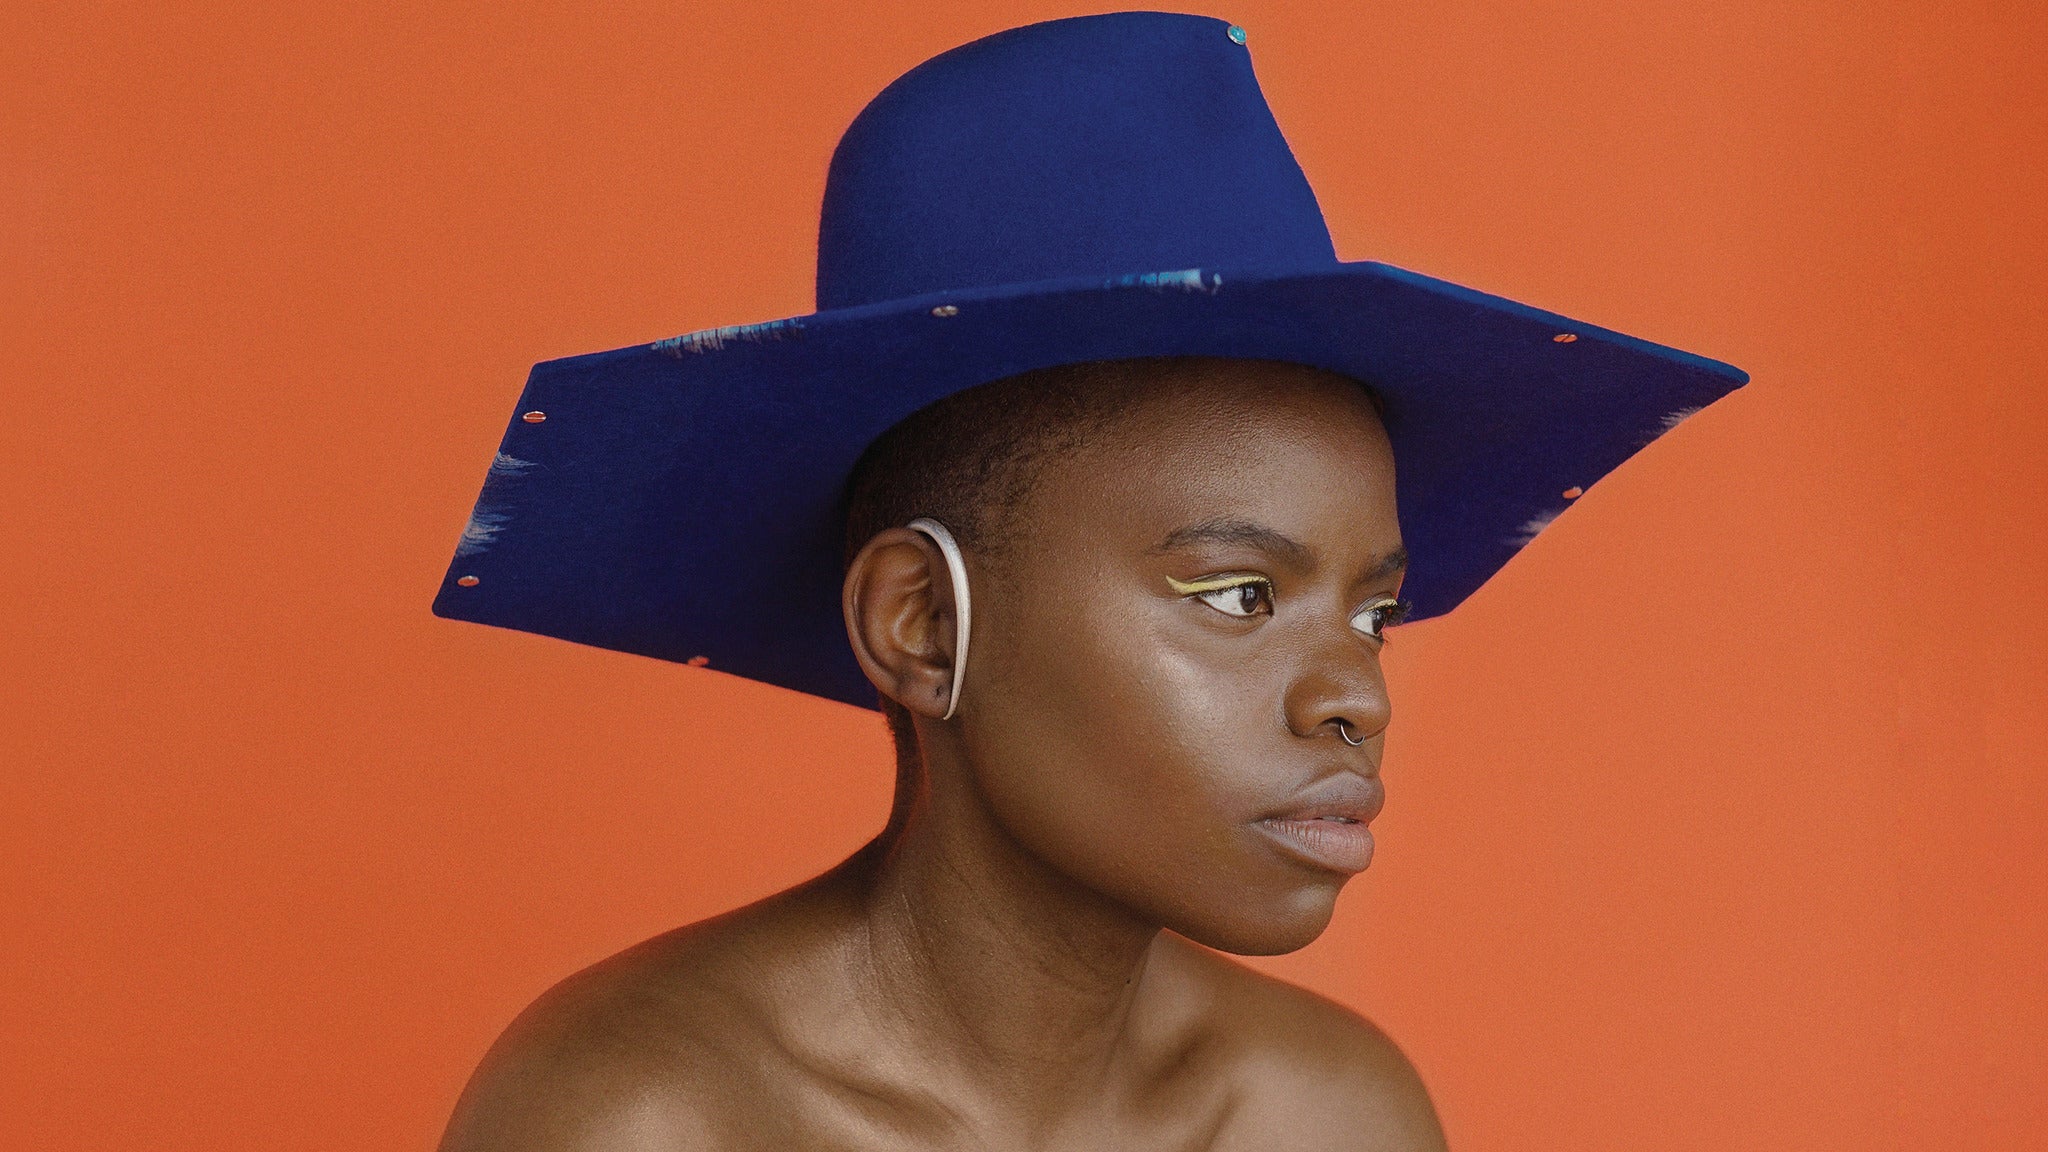 Vagabon in Somerville promo photo for Exclusive presale offer code